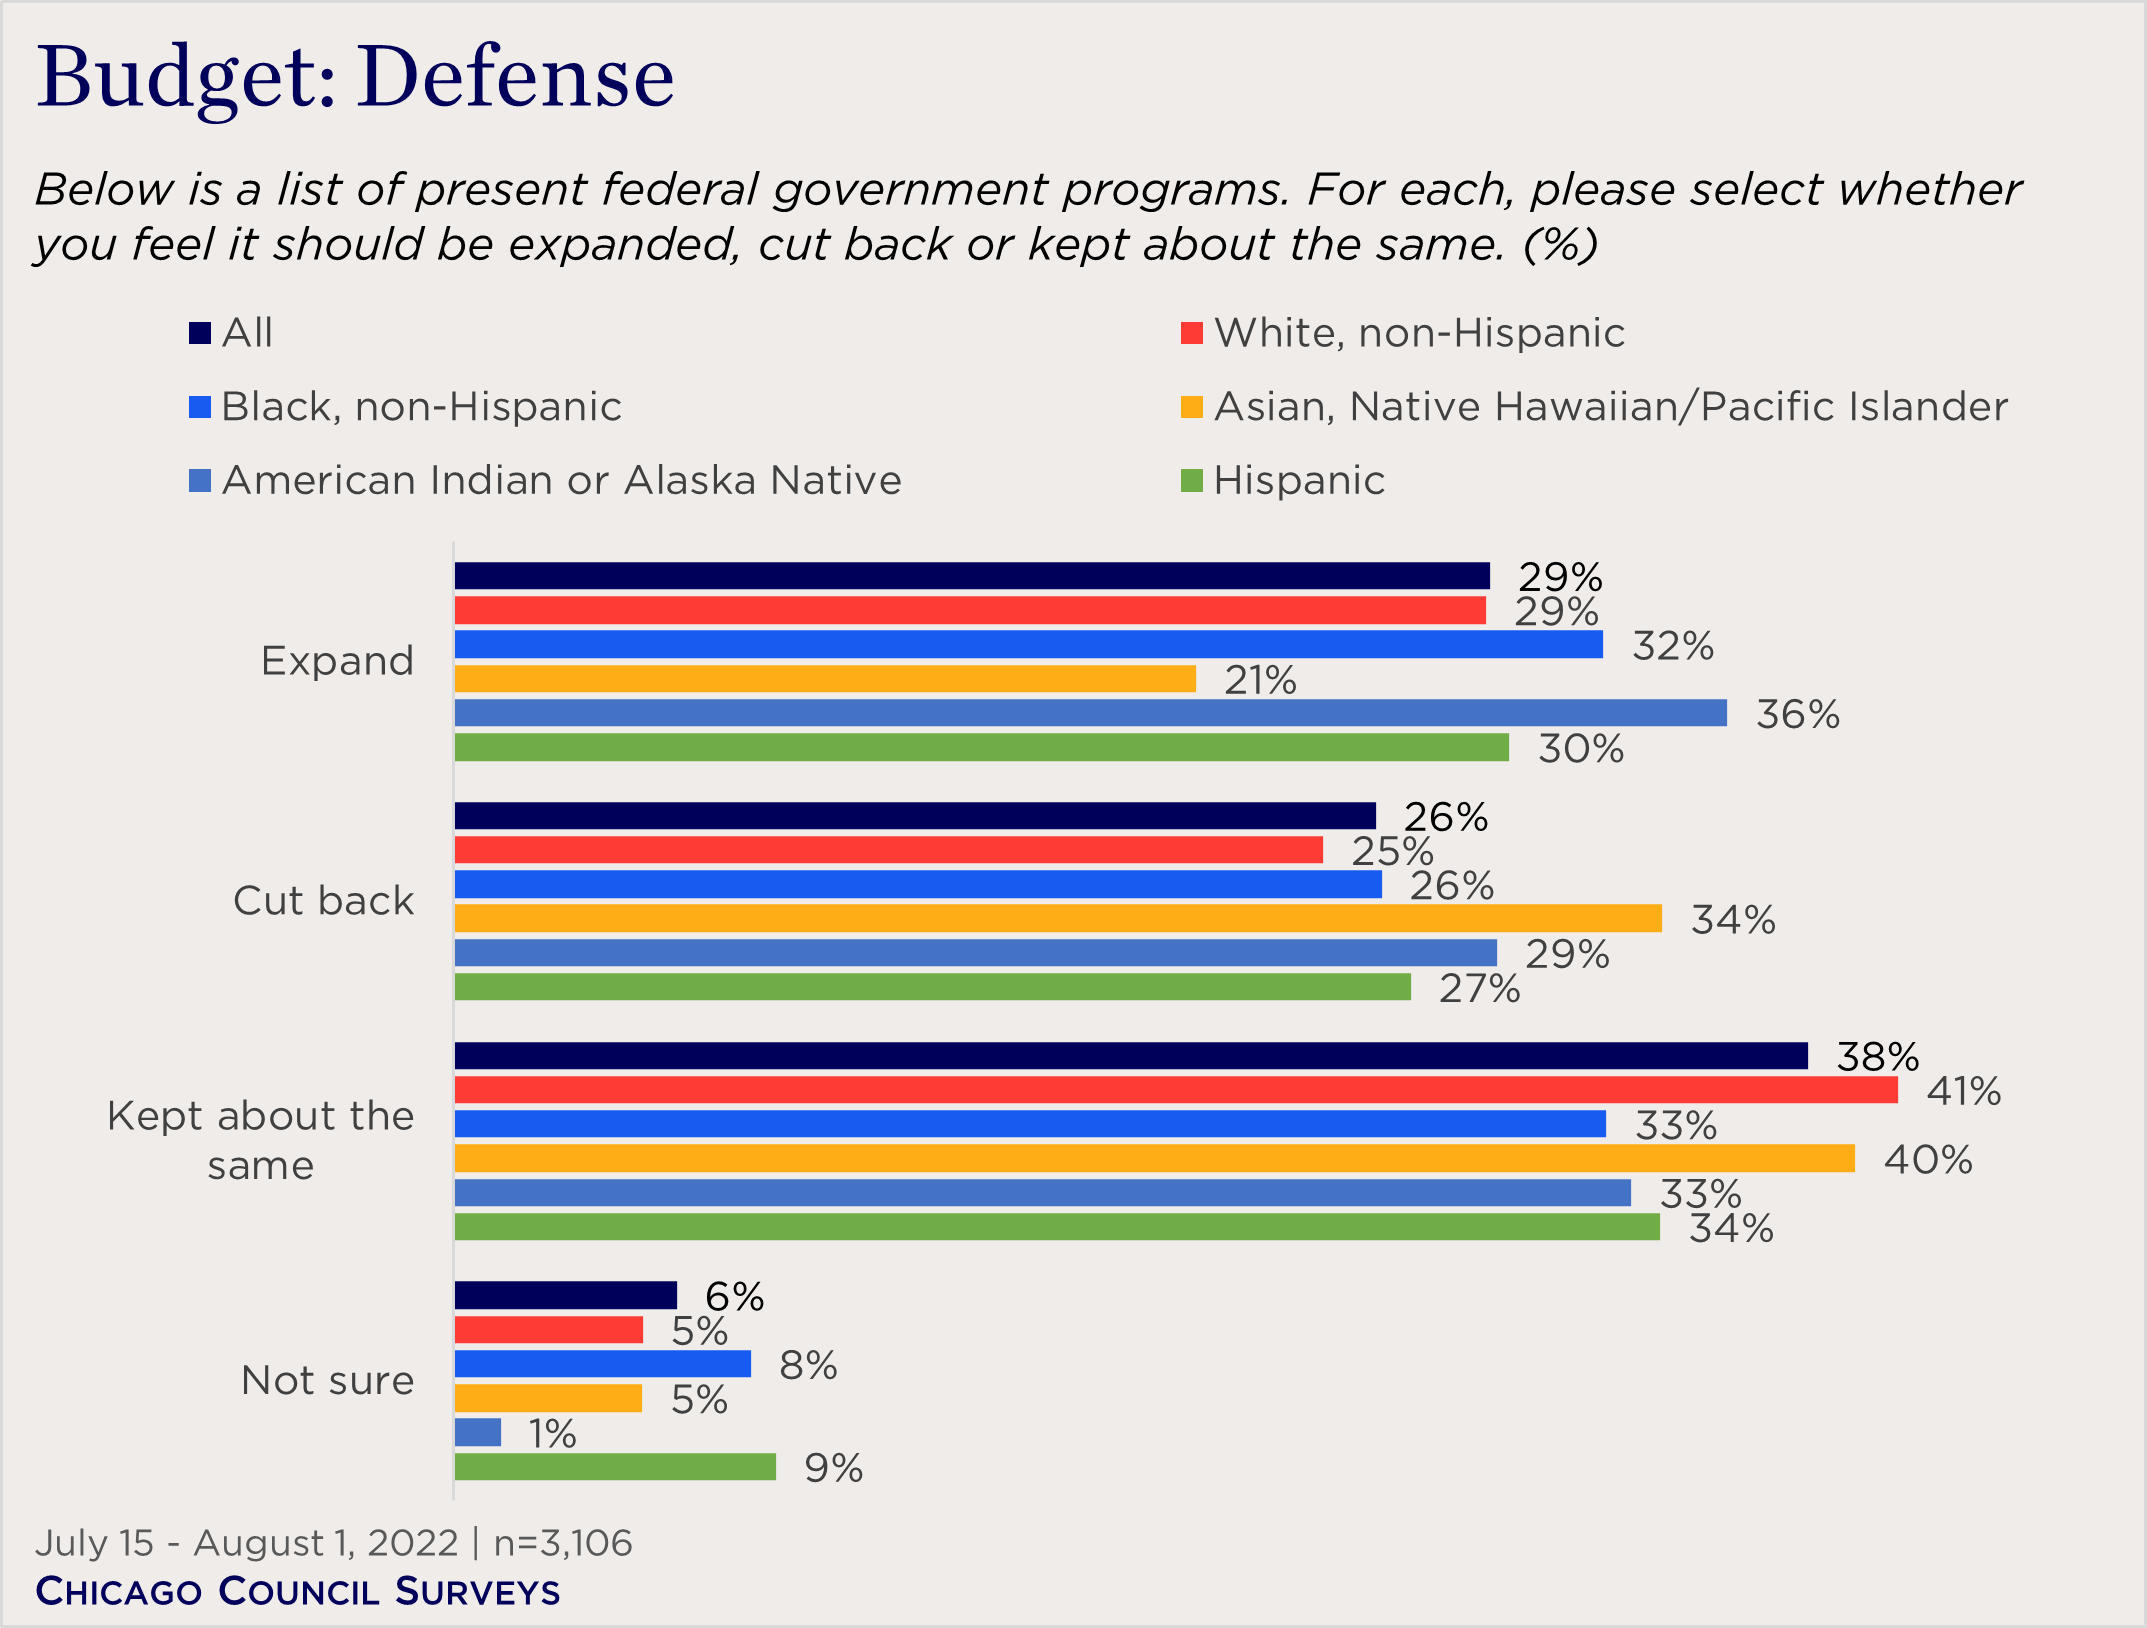 "bar chart showing views about defense budget spending by race"